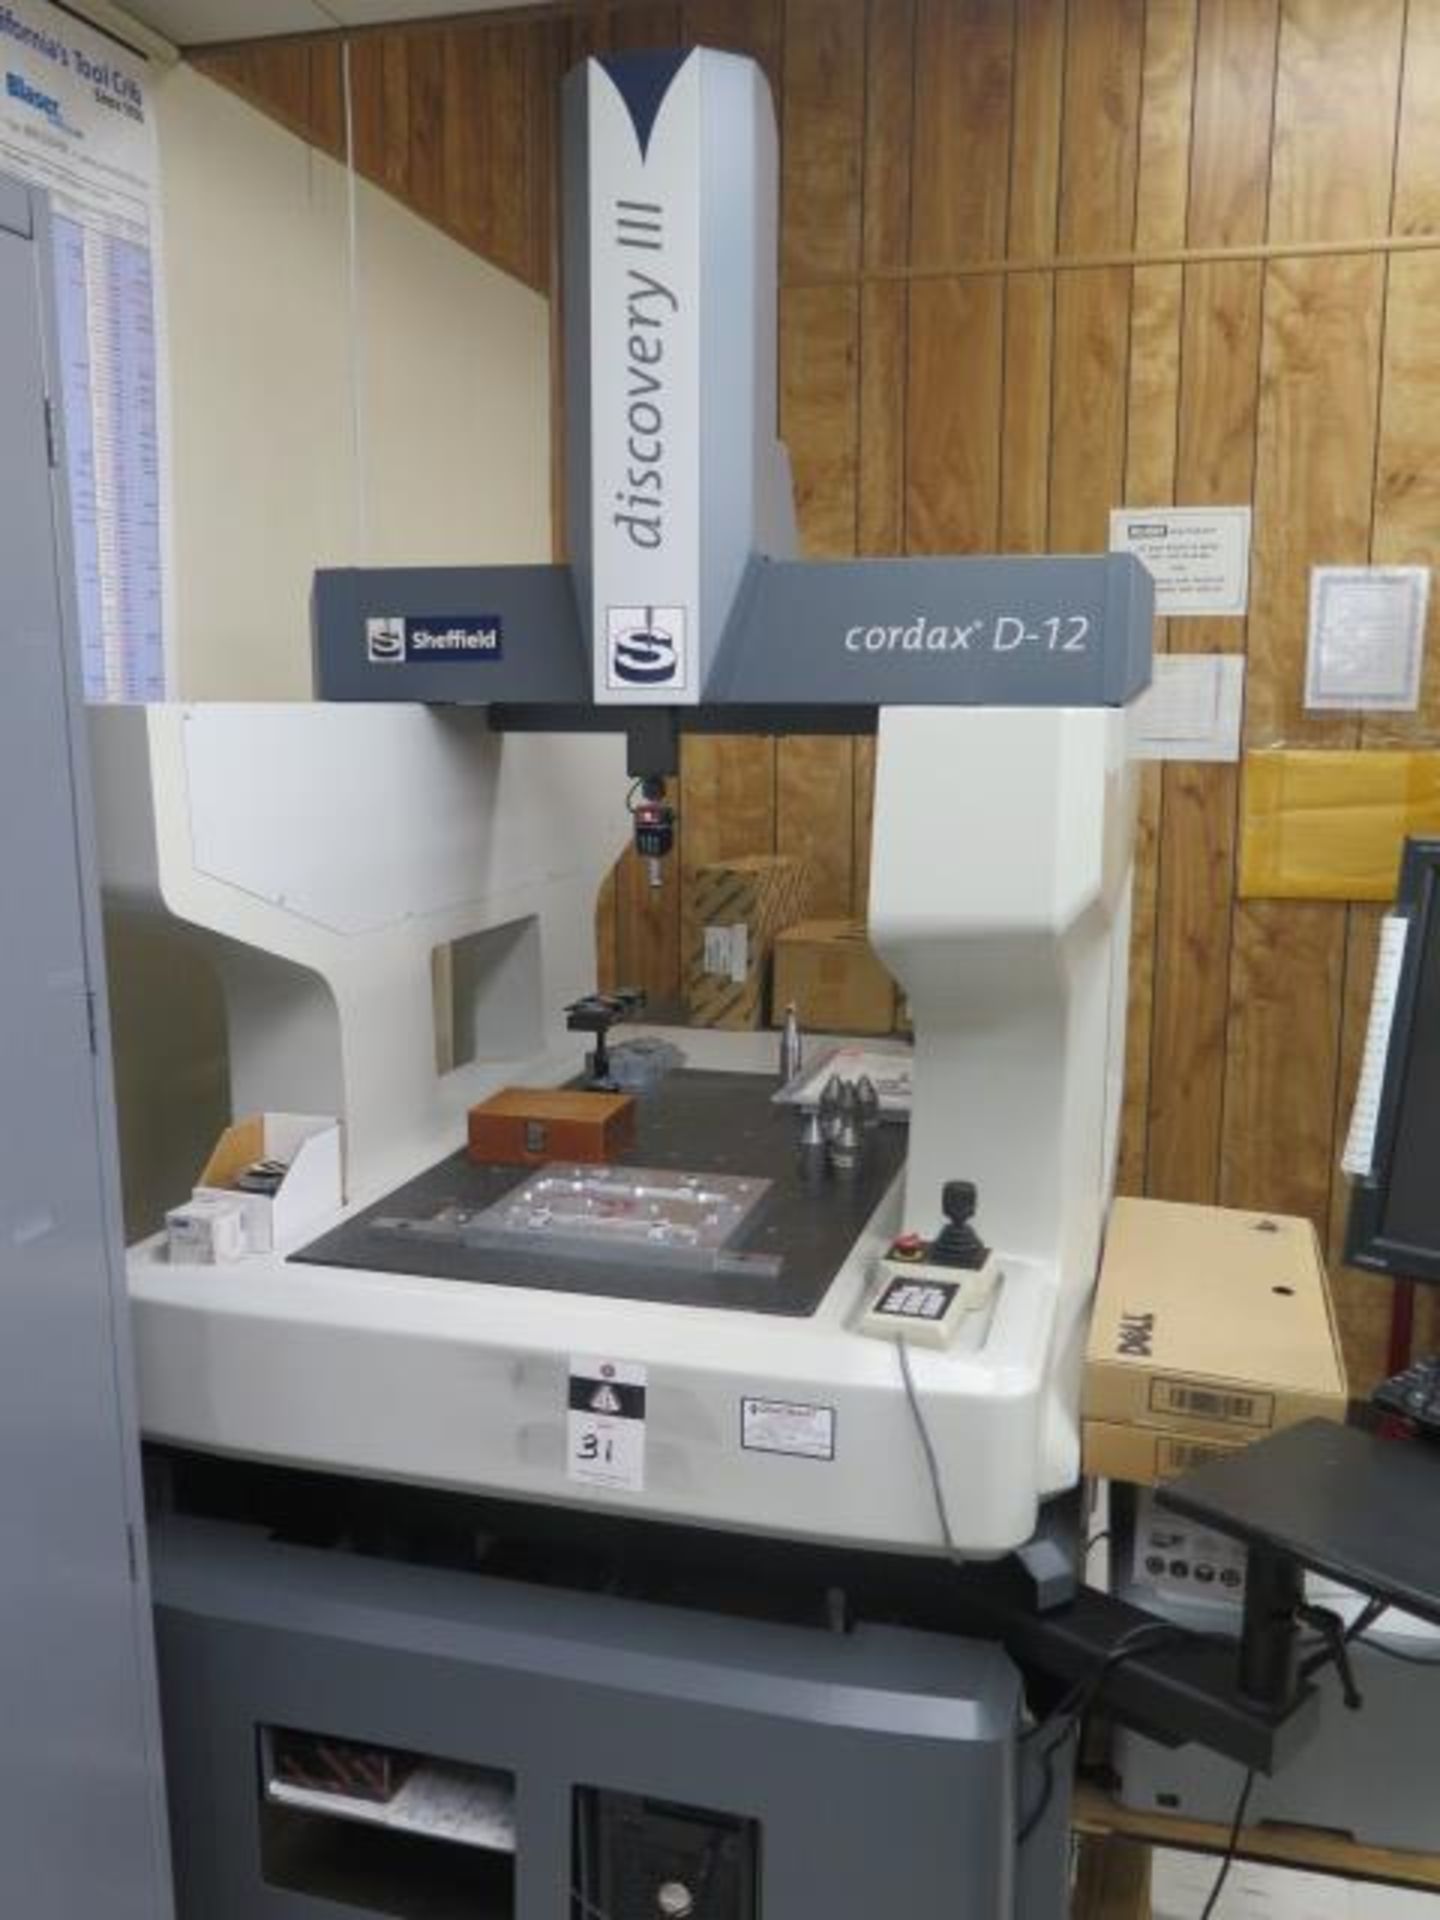 Sheffield “Discovery III” Cordax D-12 Automatic CMM s/n S-3039-1108 w/ Renishaw PH8 Probe SOLD AS IS - Image 2 of 19